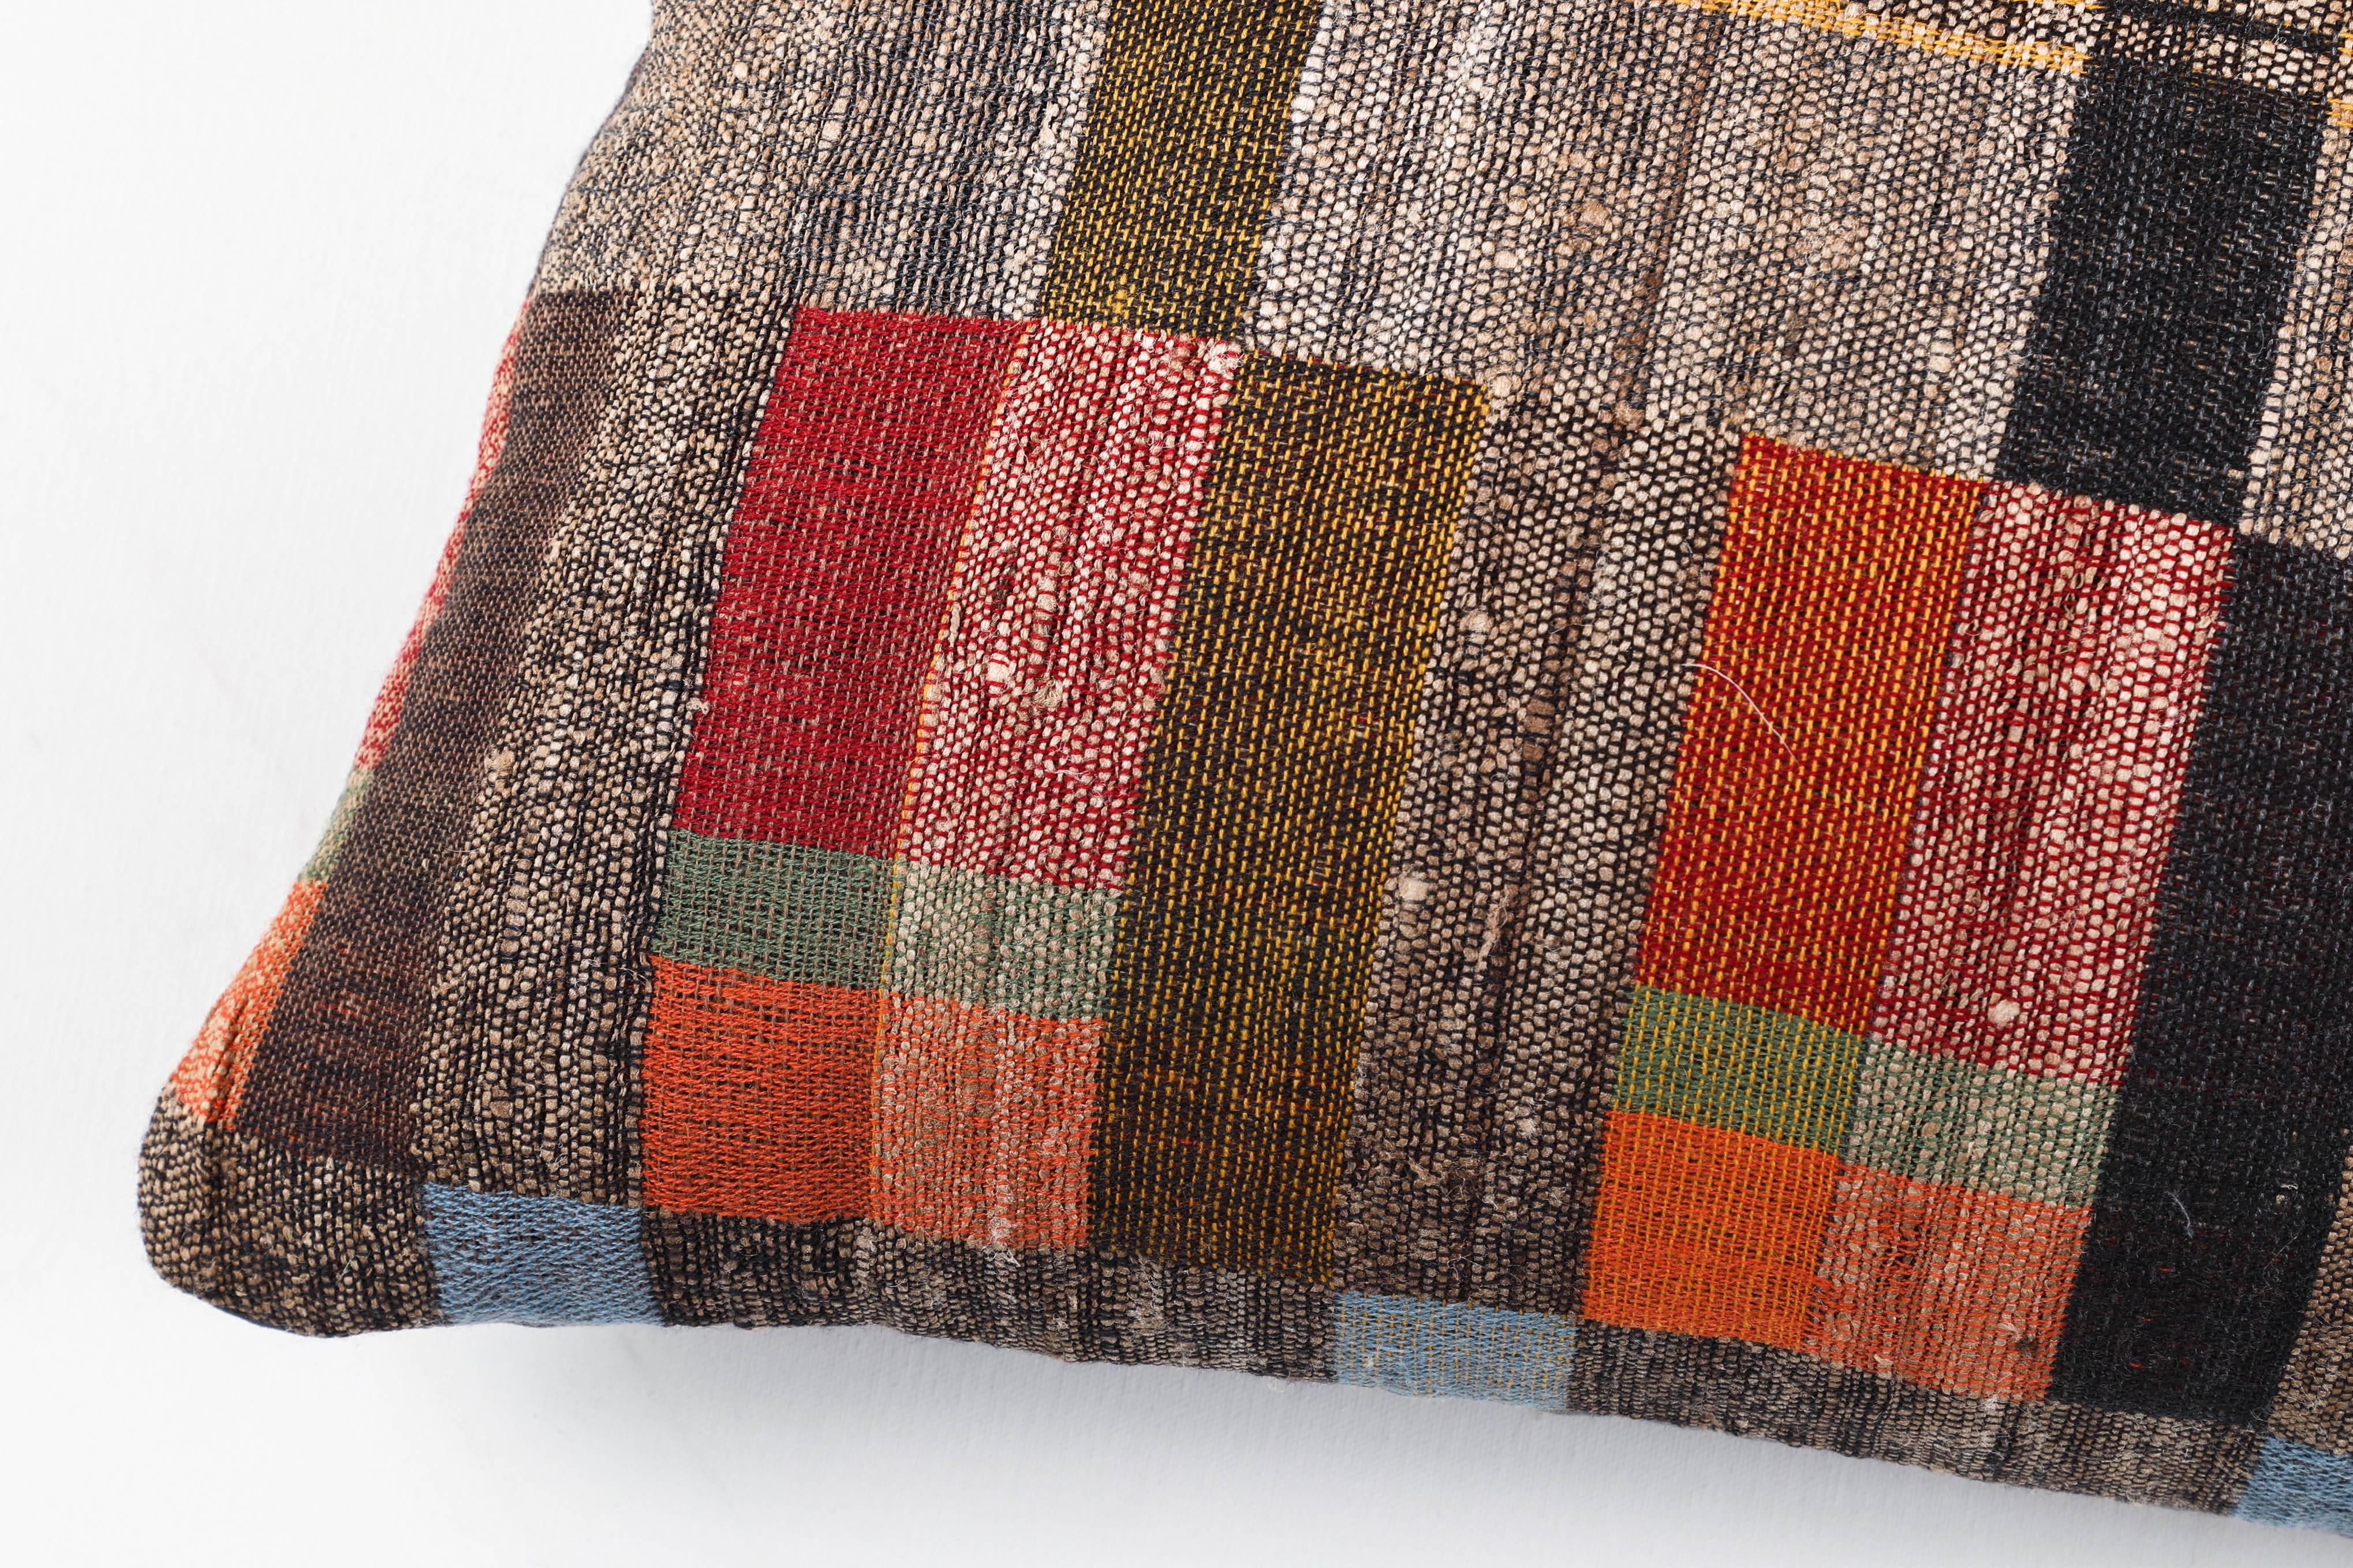 Pat McGann Workshop
A contemporary line of cushions, pillows, throws, bedcovers, bedspreads and yardage hand woven in India on antique Jacquard looms. Hand spun wool, cotton, linen, and raw silk give the textiles an appealing uneven quality. Sizes